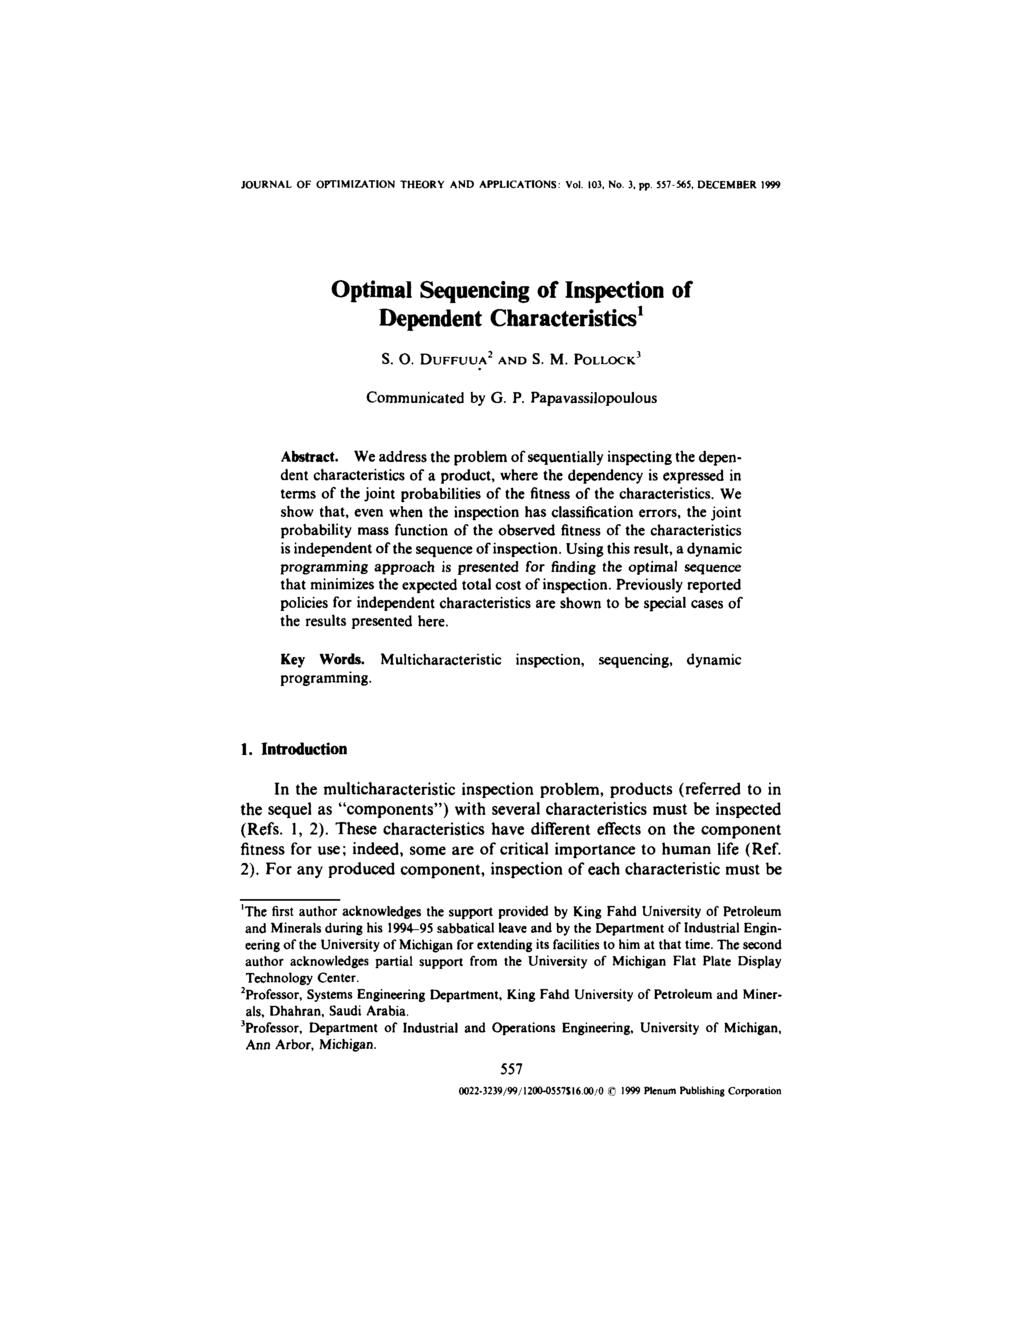 JOURNAL OF OPTIMIZATION THEORY AND APPLICATIONS: Vol. 103, No. 3, pp. 557-565, DECEMBER 1999 Optimal Sequencing of Inspection of Dependent Characteristics 1 S. O. DUFFUUA 2 AND S. M.